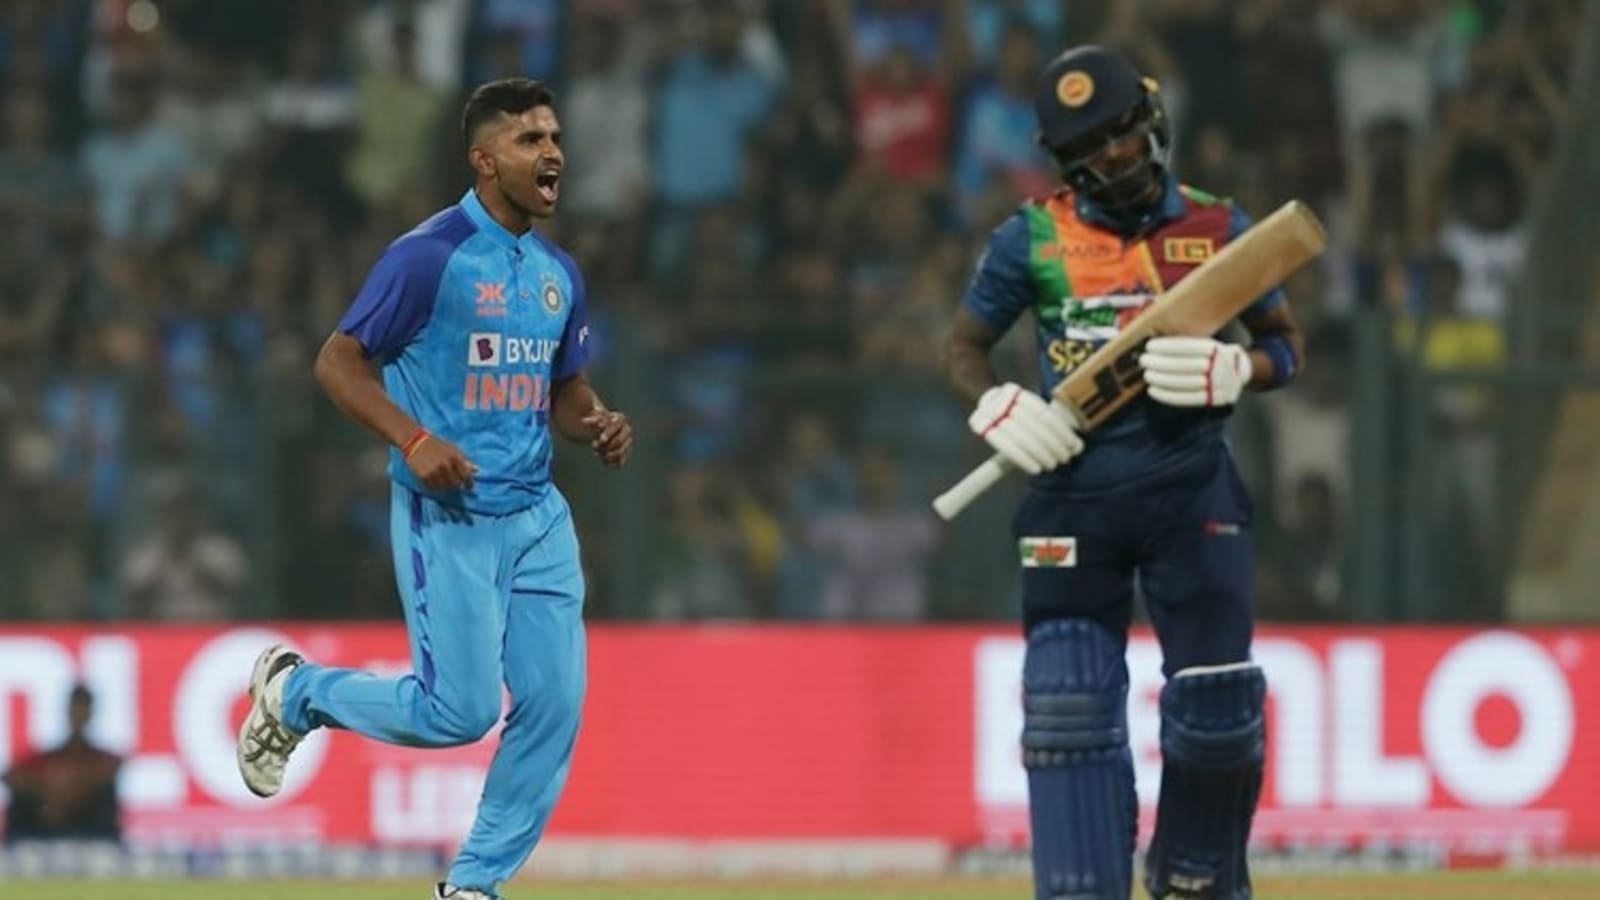 India vs Sri Lanka Highlights 1st T20 IND beat SL by 2 runs in final ball thriller, go 1-0 up in three-match series Hindustan Times